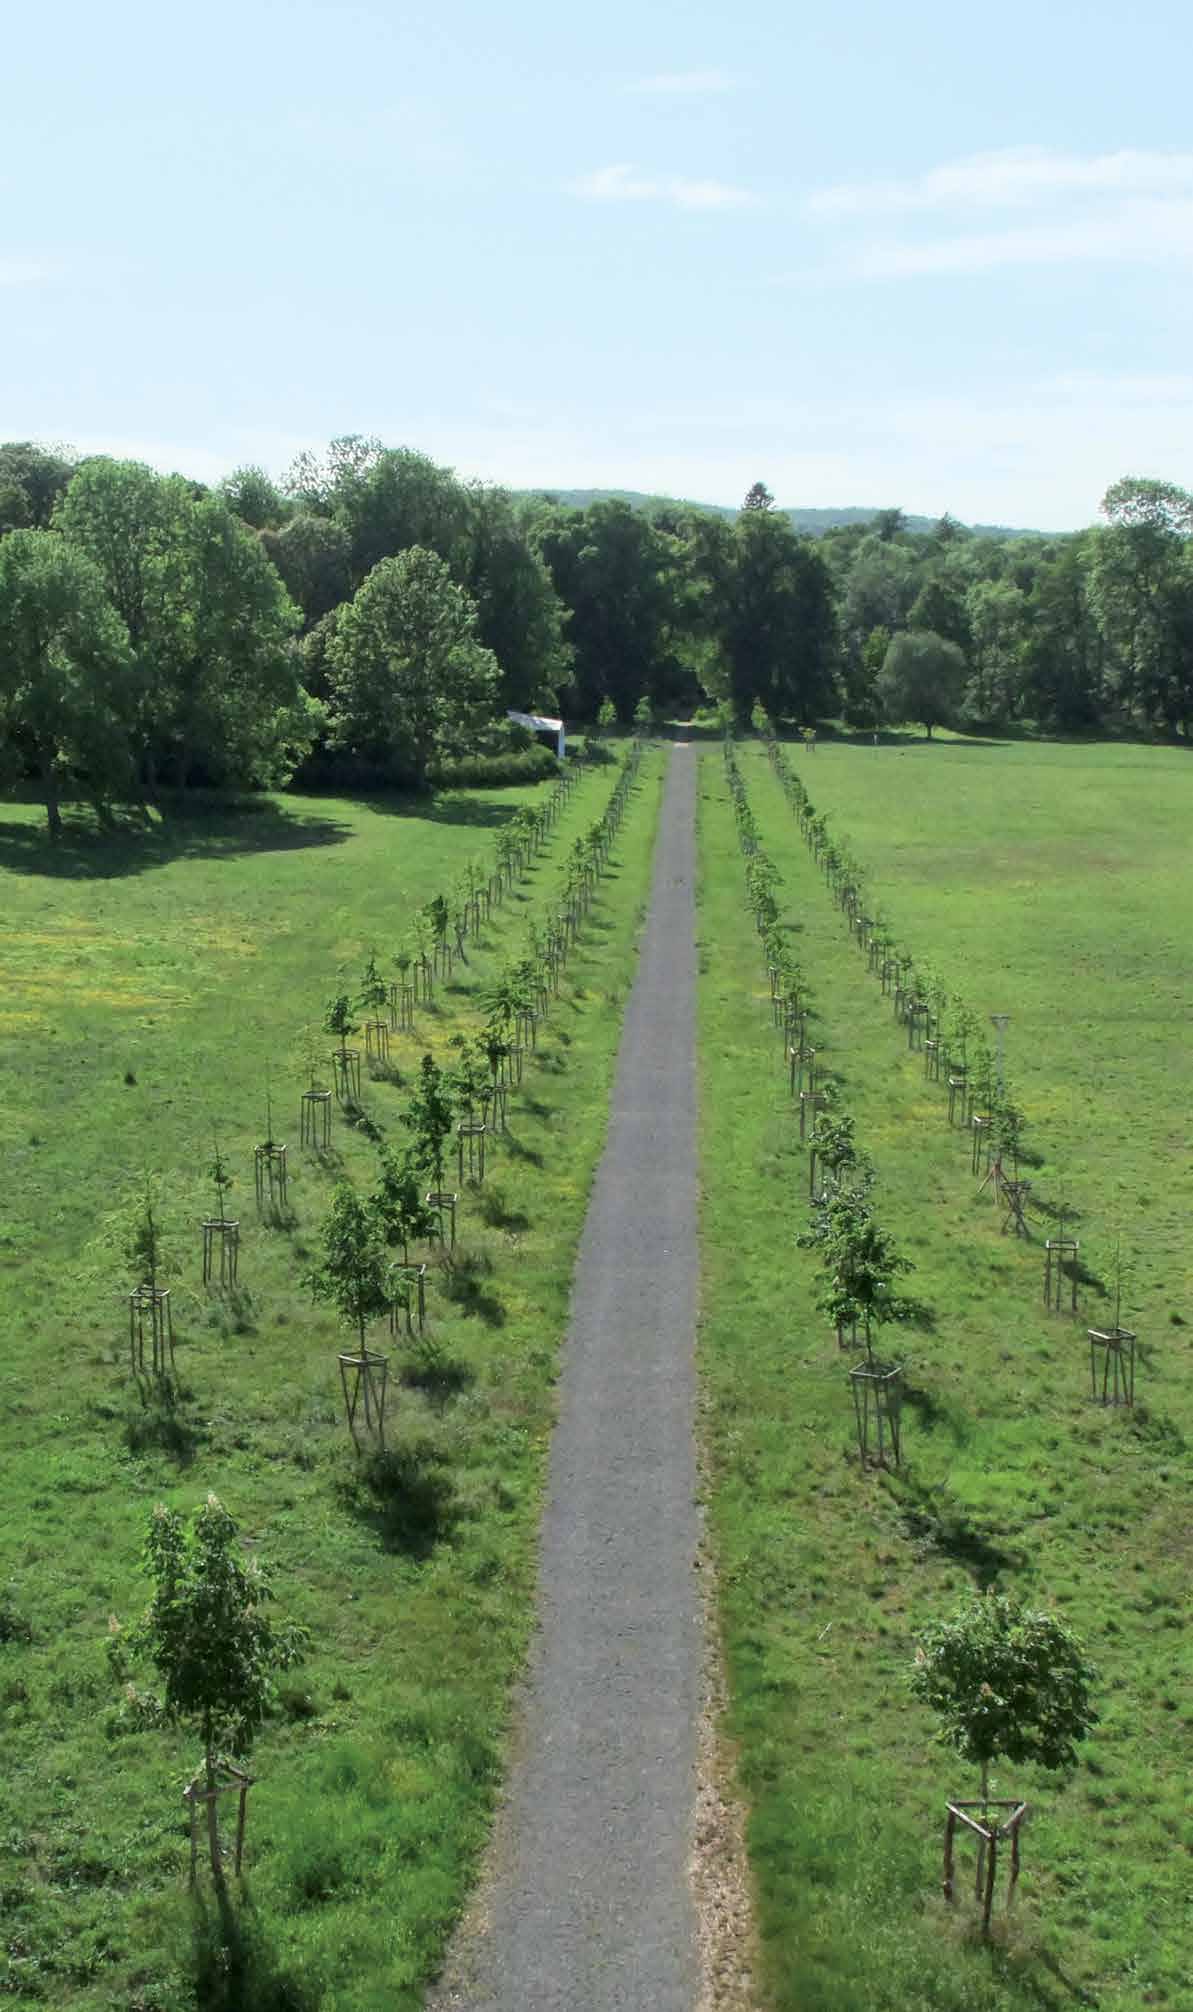 Recreated promenade with four rows of linden trees.
Photo taken in front of New Palace in 2012